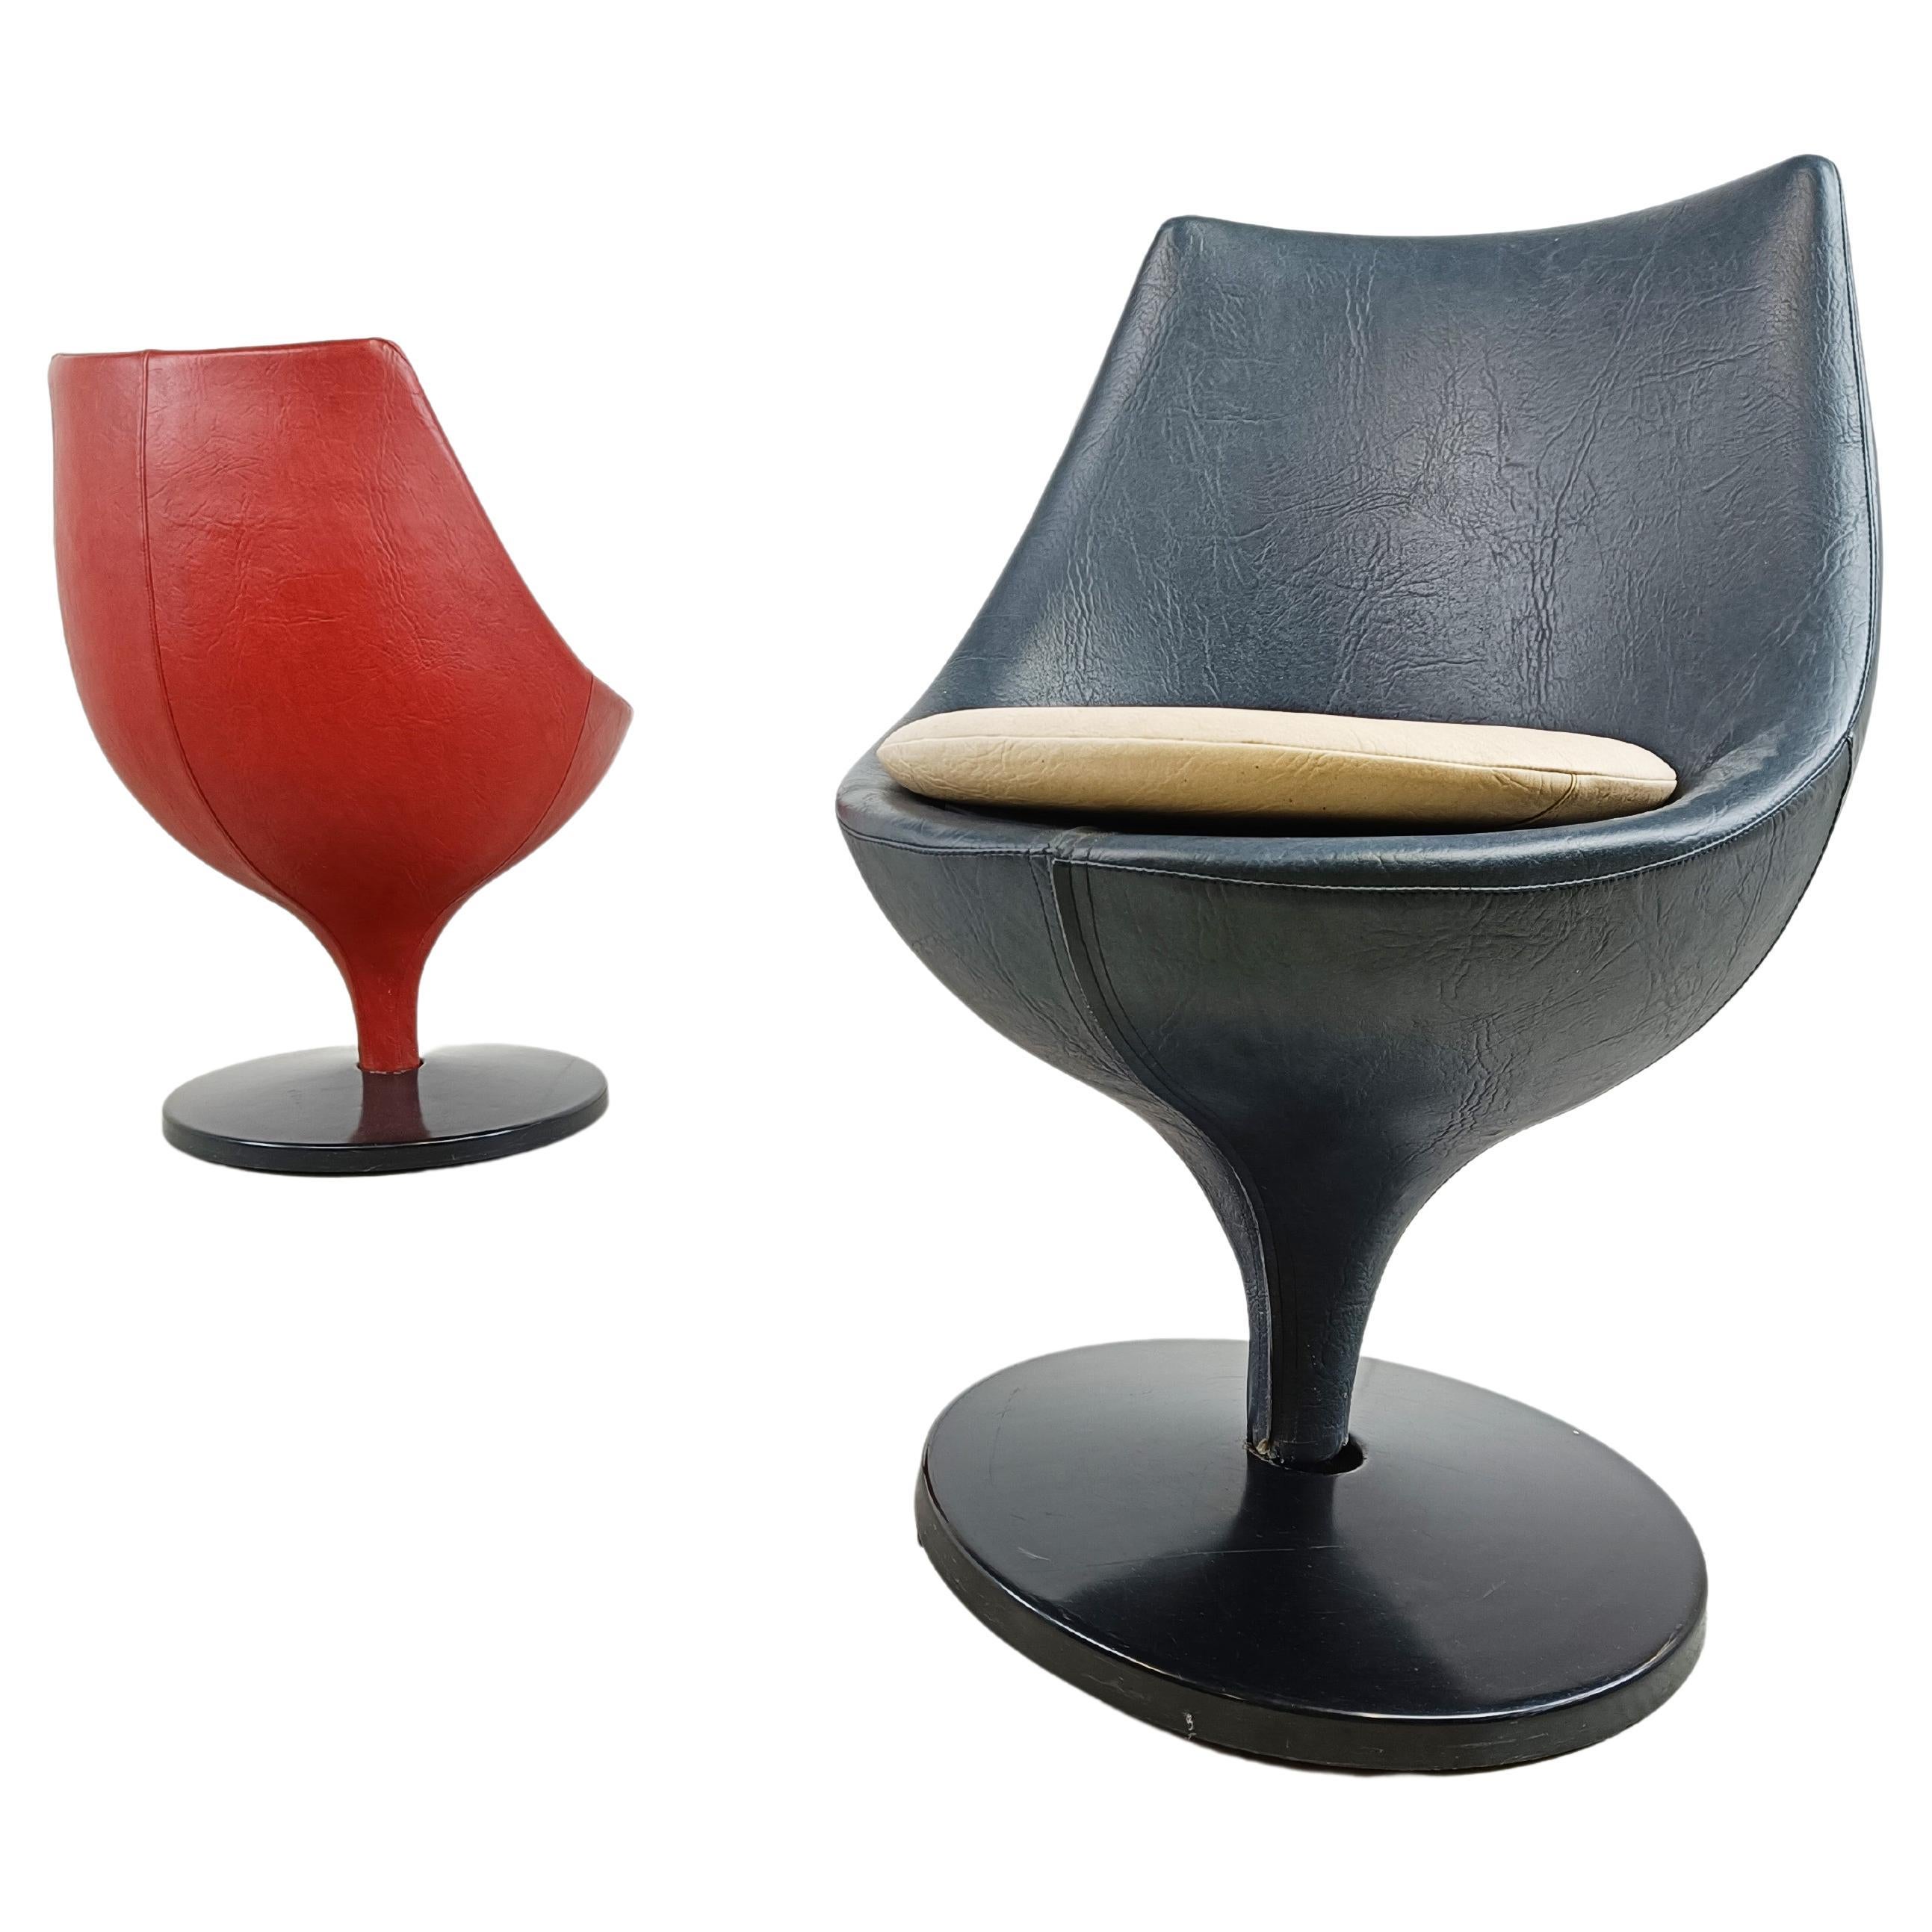 Pair of Polaris Chairs by Pierre Guariche for Meurop, 1960s For Sale